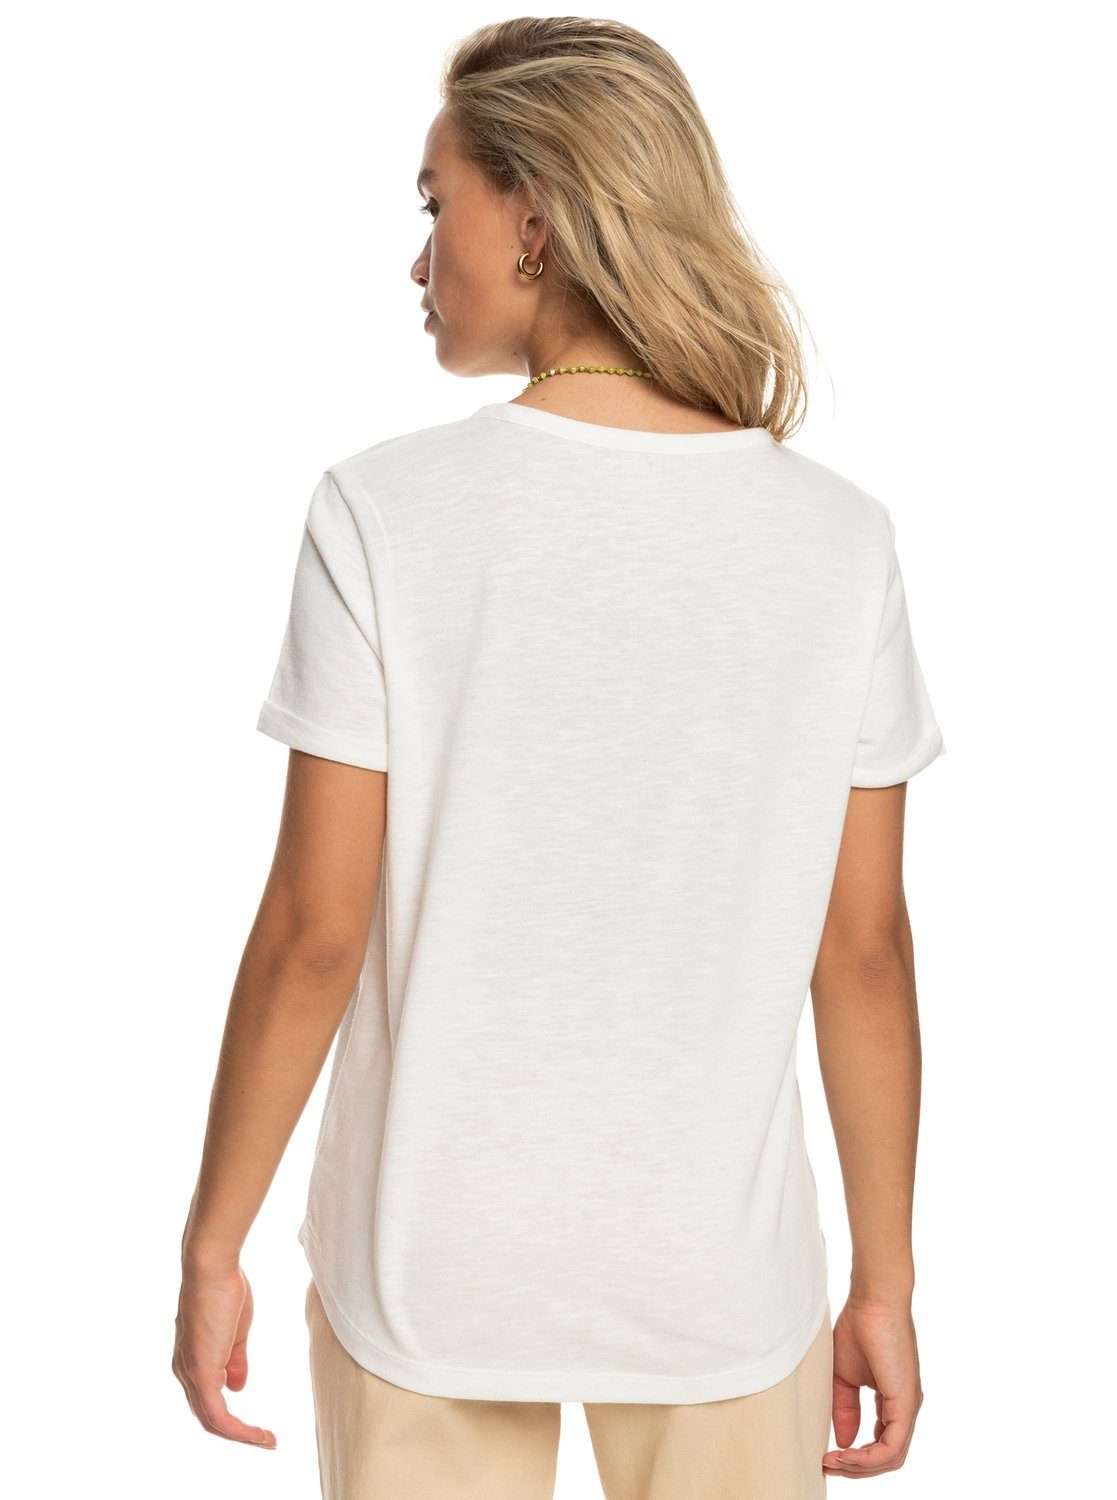 Roxy T-Shirt Ocean Snow After White